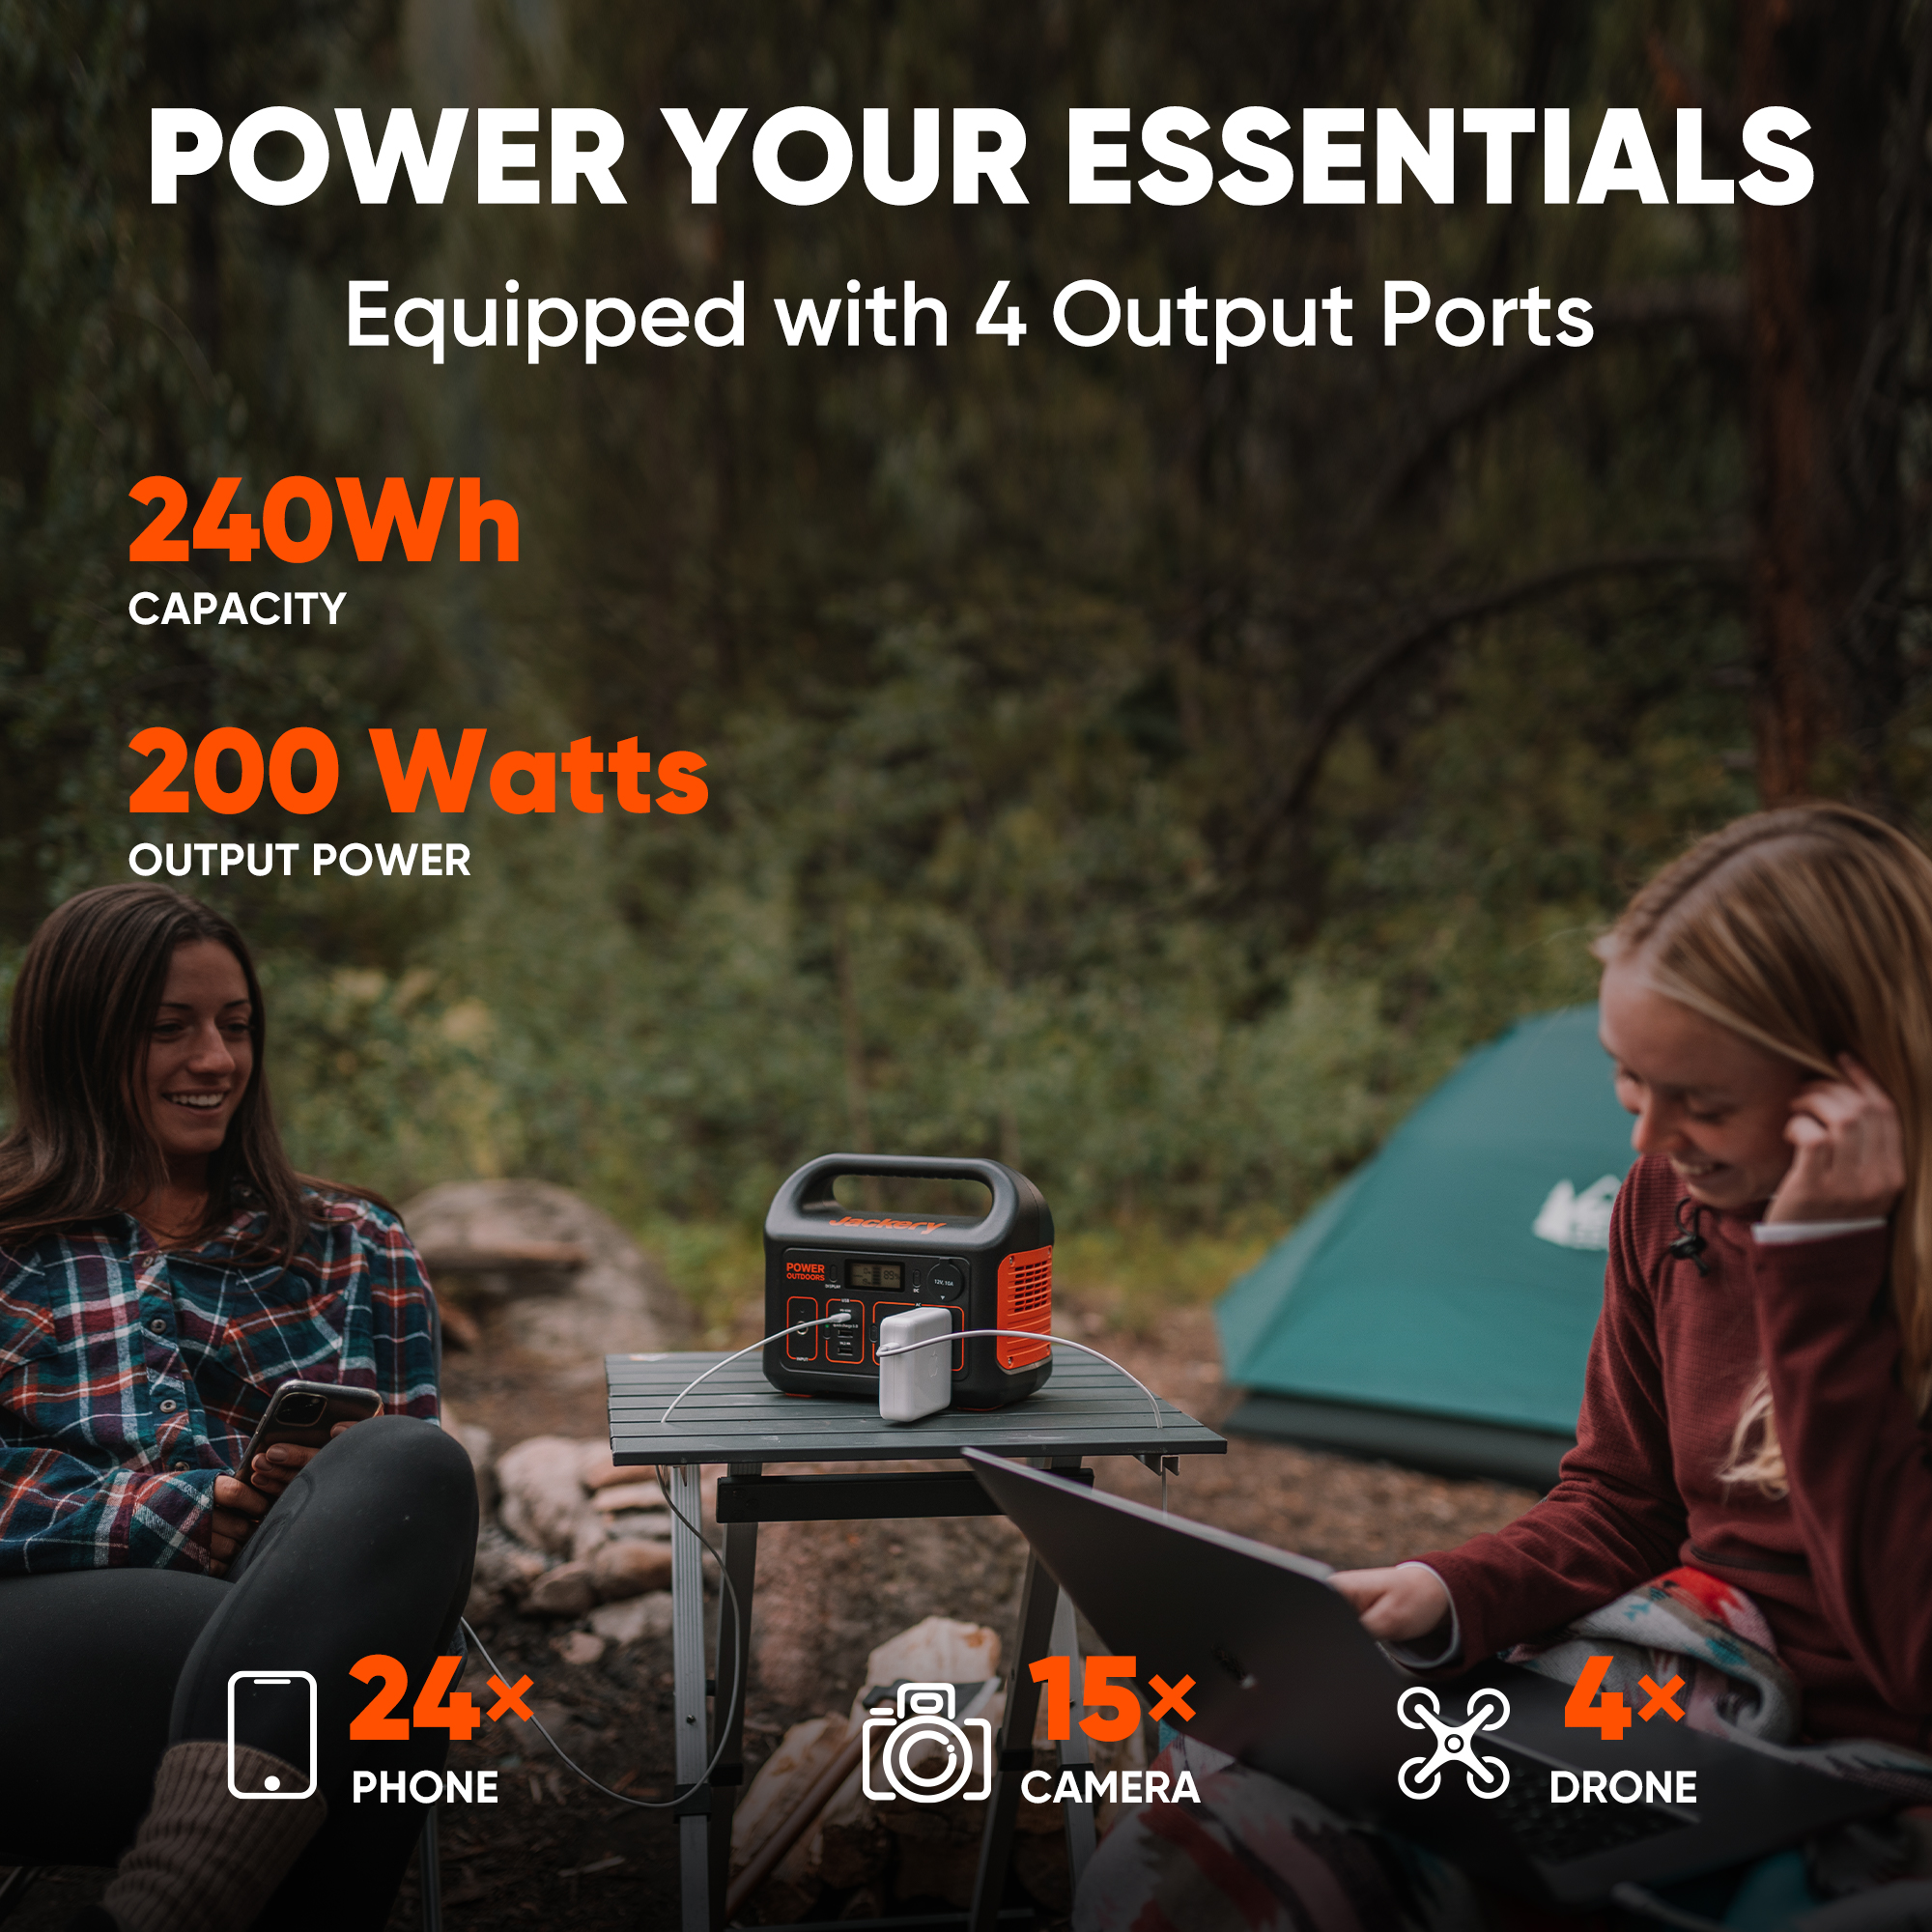 Jackery Portable Power Station Explorer 240, 240Wh Backup Lithium Battery, 110V/200W Pure Sine Wave AC Outlet, Solar Generator for Outdoors Camping Travel Hunting Emergency (Solar Panel Optional) - image 2 of 5